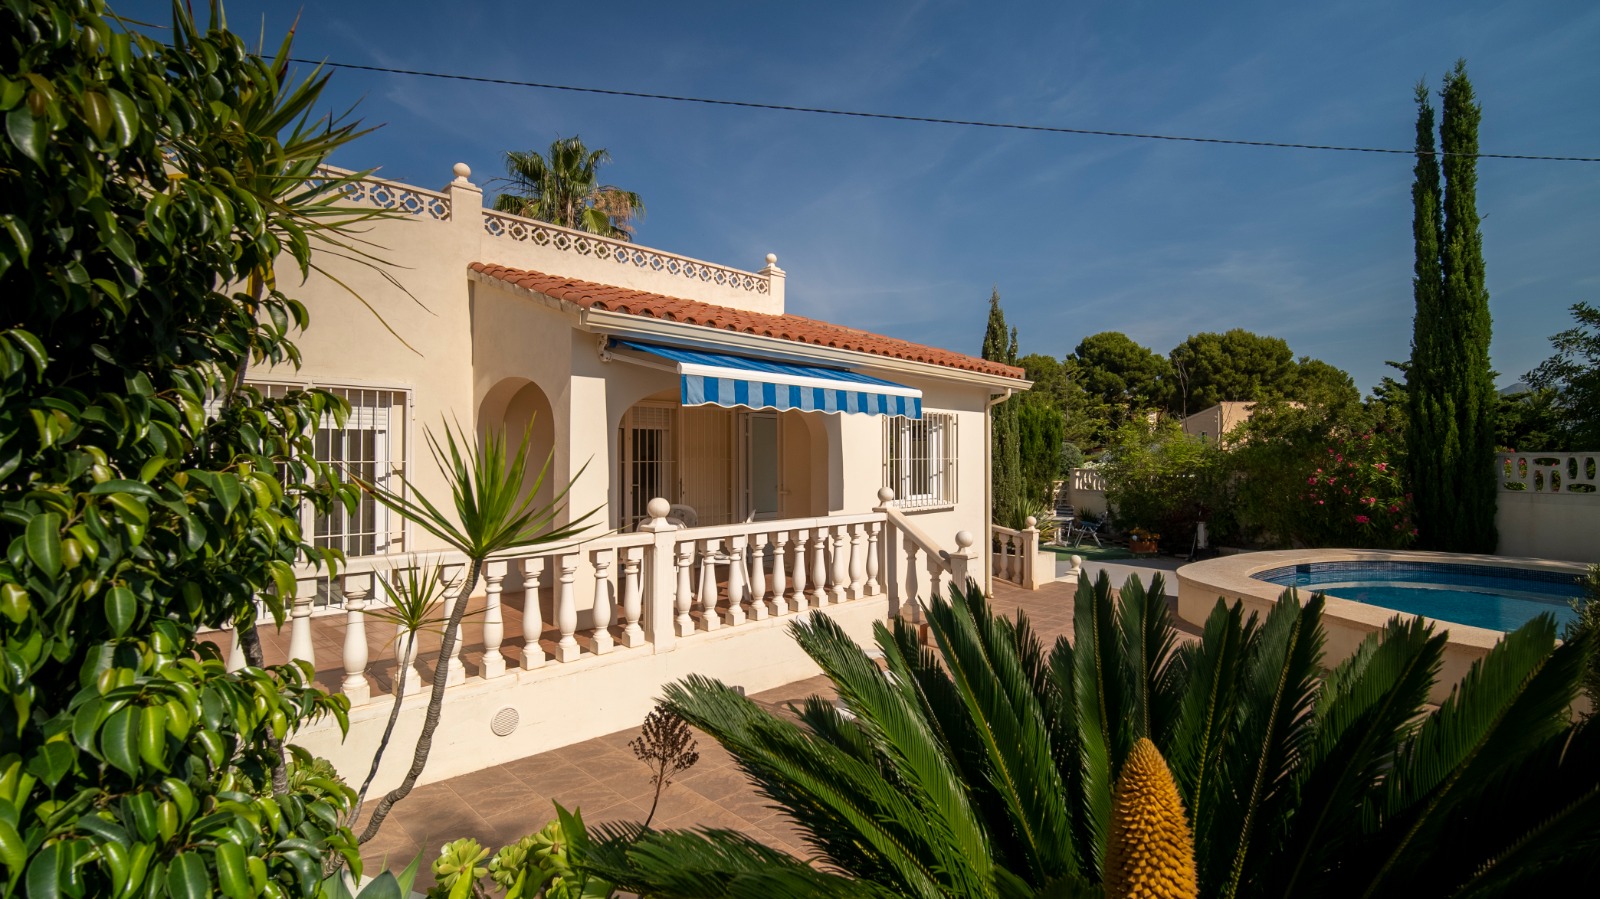 Fantastic villa with 2 guest apartments close to the center